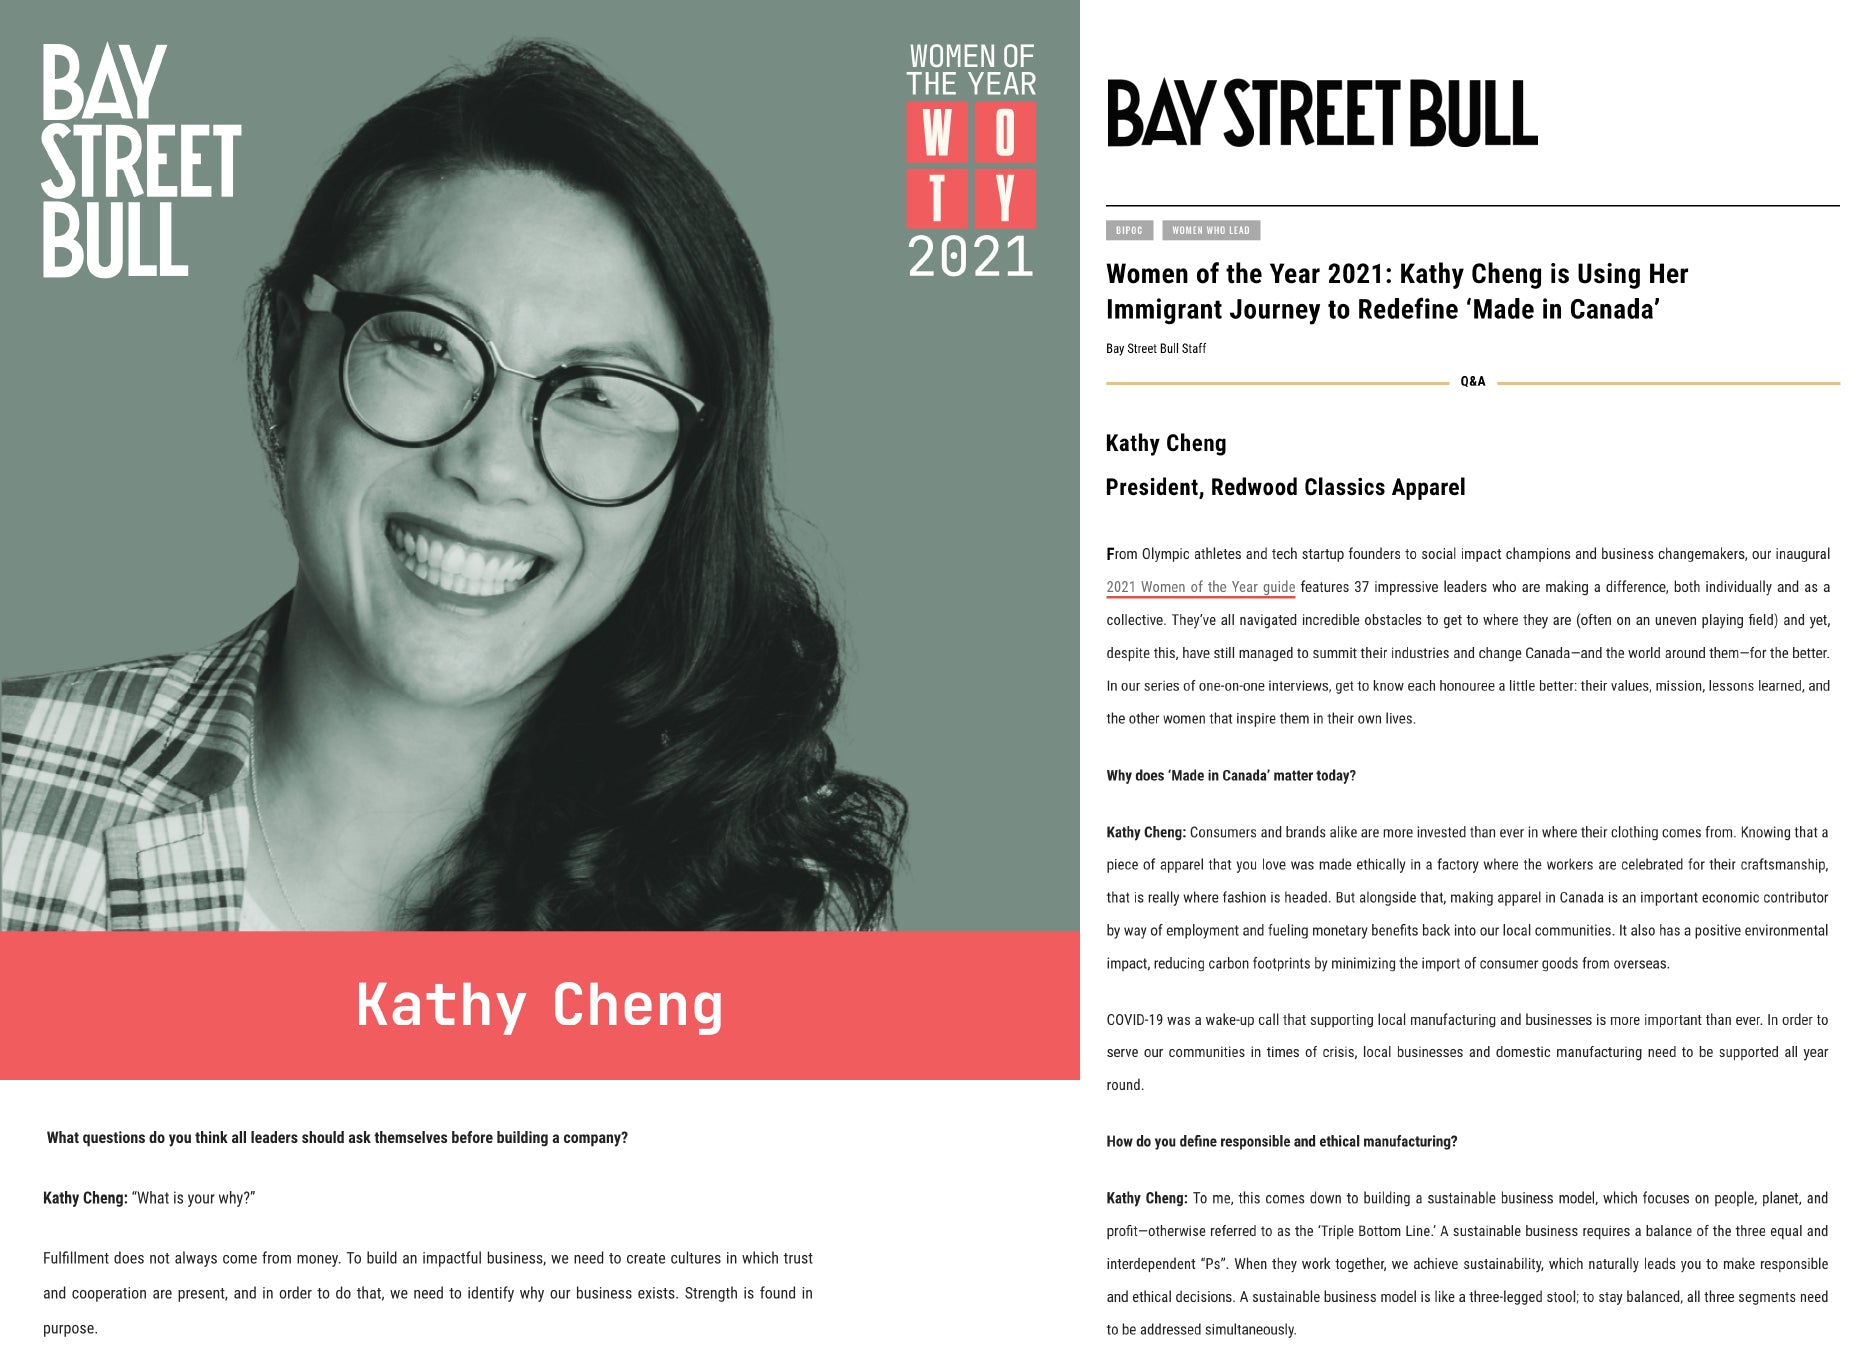 Bay Street Bull - Women of The Year (WOTY): Kathy Cheng, Redwood Classics Apparel